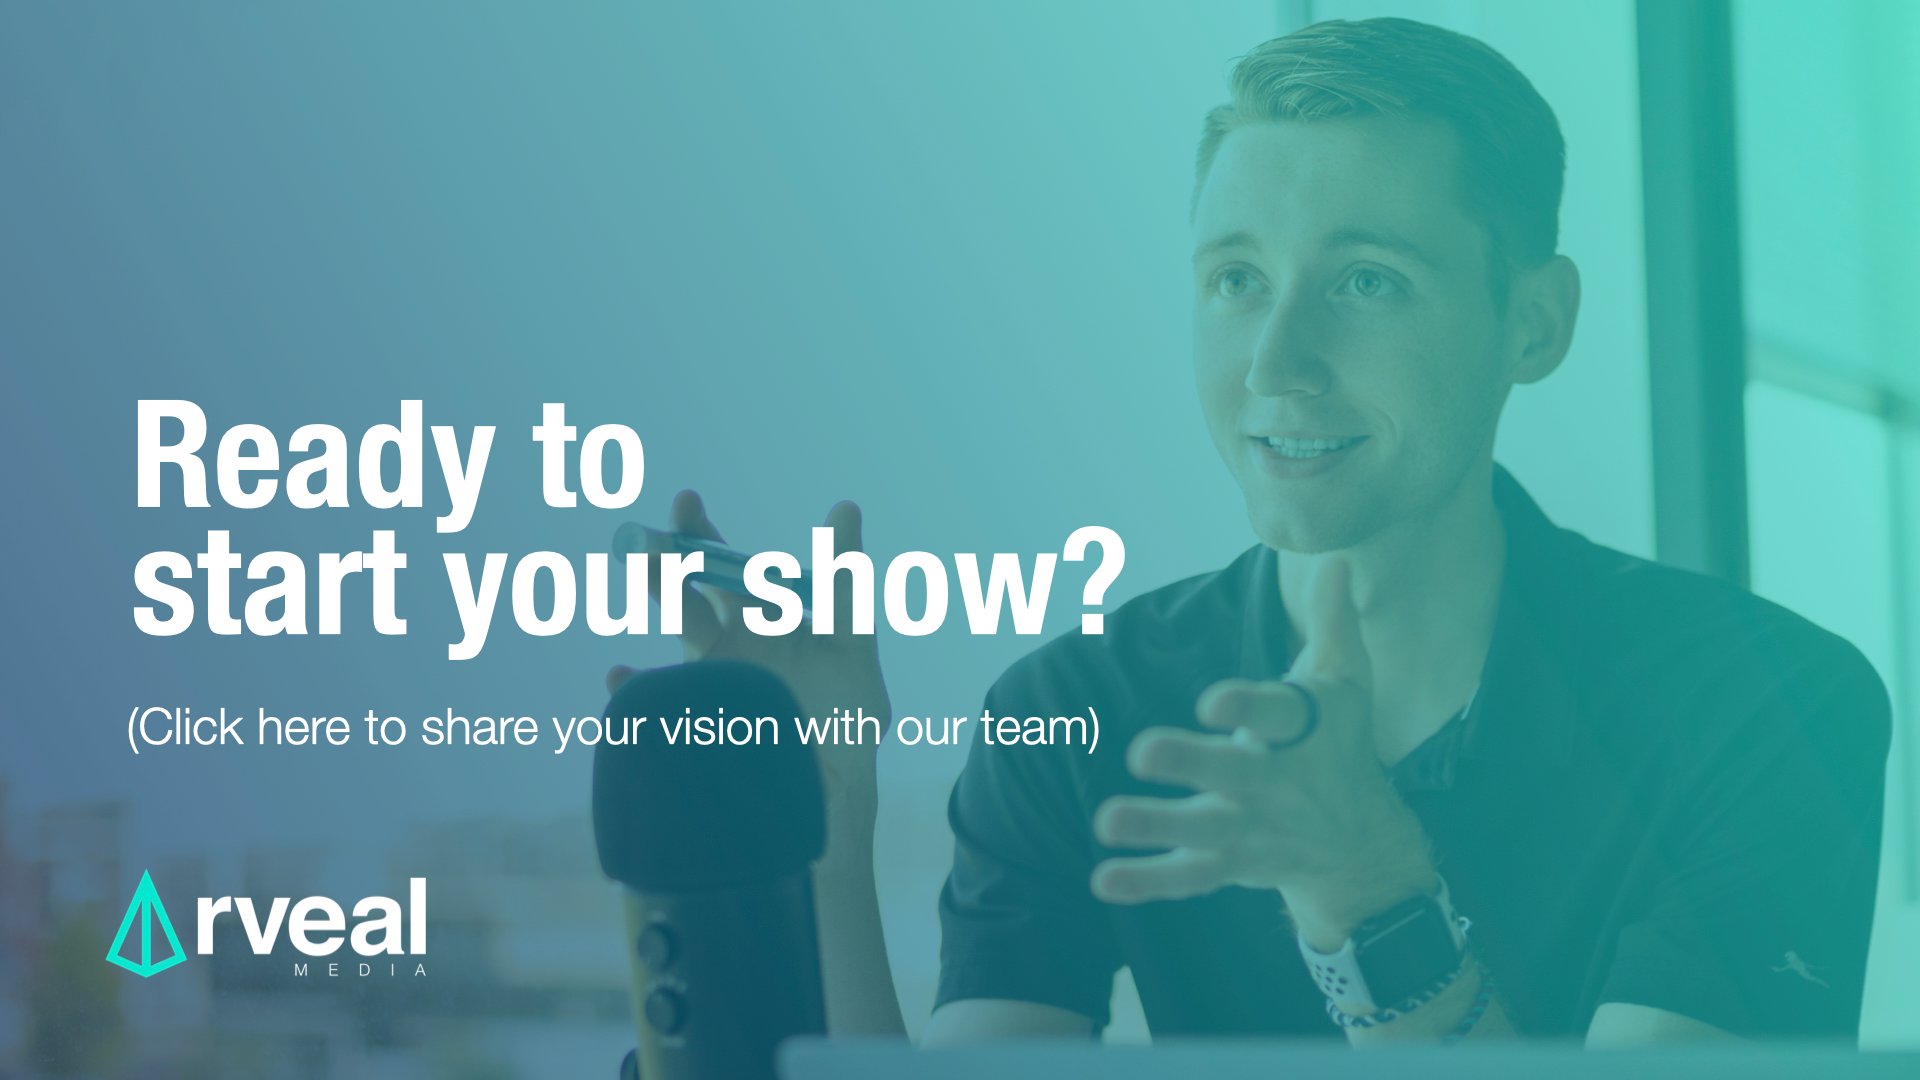 Ready to start your show with Rveal Media?